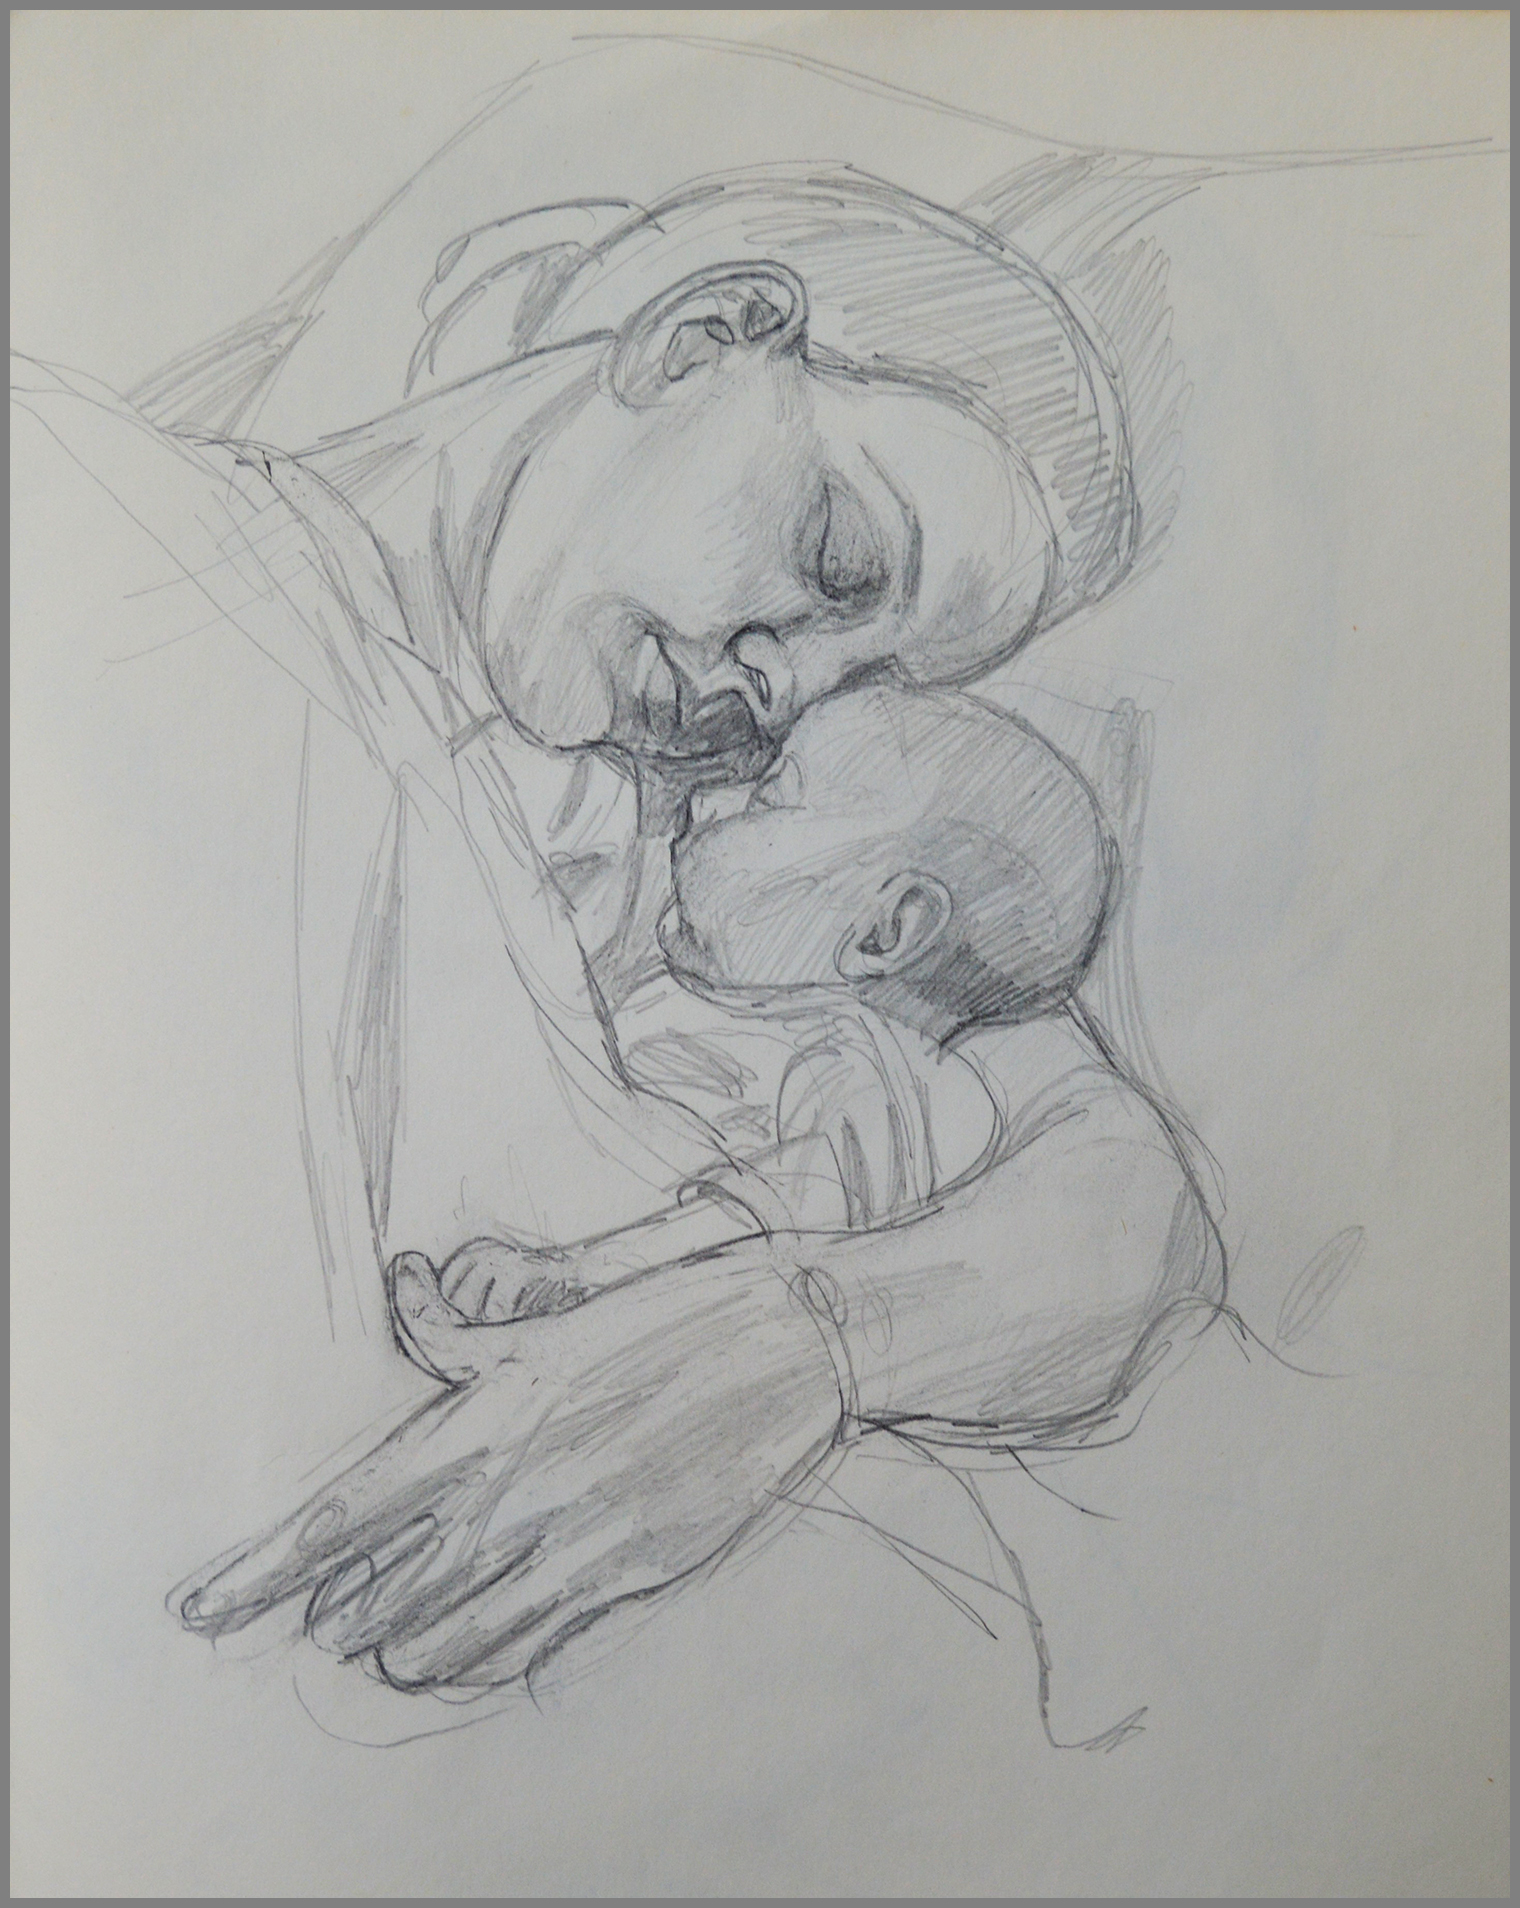  Sleeping Mother and Child, pencil, 14 x 10 inches 